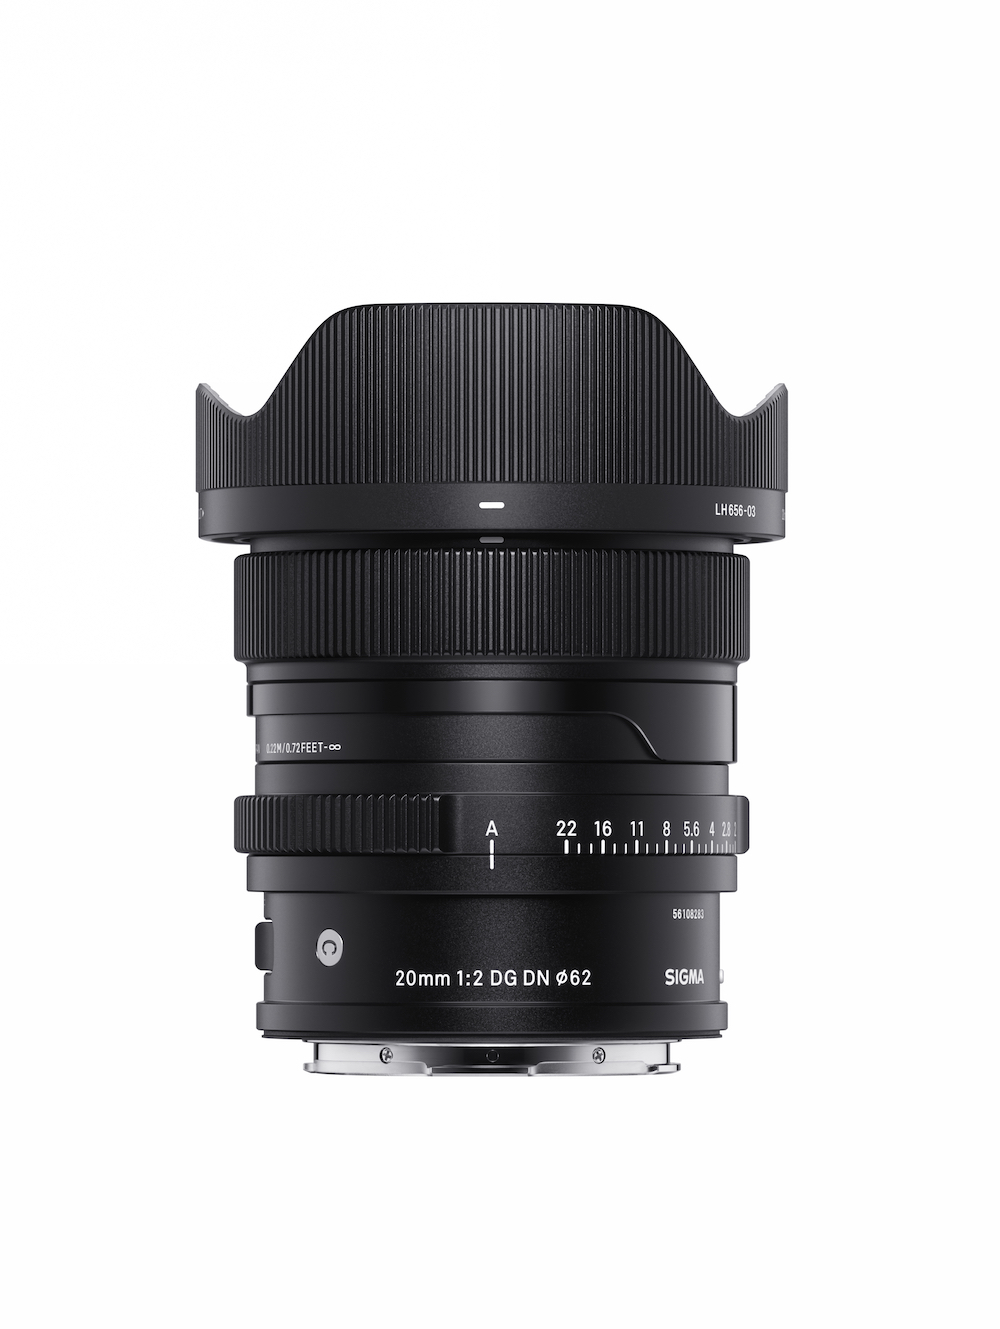 The new 20mm Sigma optic shown with lens hood